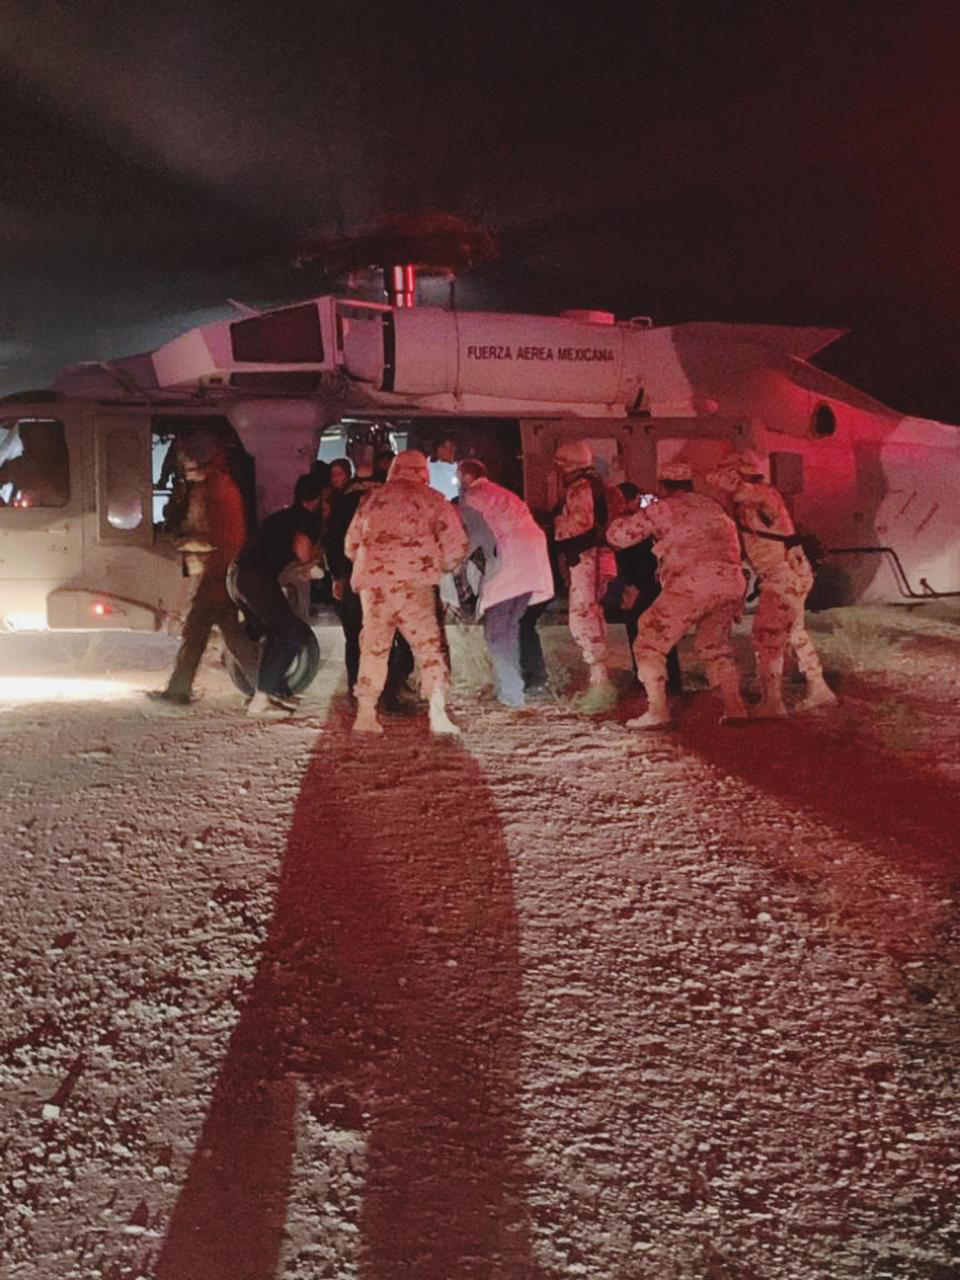 In this photo provided by the Sonora state Health Secretary, children of the extended LeBaron family, who were injured in an ambush are taken aboard a Mexican Airforce helicopter to be flown to the Mexico-U.S. border, from the border between the Mexican states of Chihuahua and Sonora, Monday, Nov.4, 2019. The children were injured when drug cartel gunmen ambushed three SUVs along a dirt road, slaughtering six children and three women, all U.S. citizens living in northern Mexico, in a grisly attack that left one vehicle a burned-out, bullet-riddled hulk. (Sonora state Health Secretary via AP)